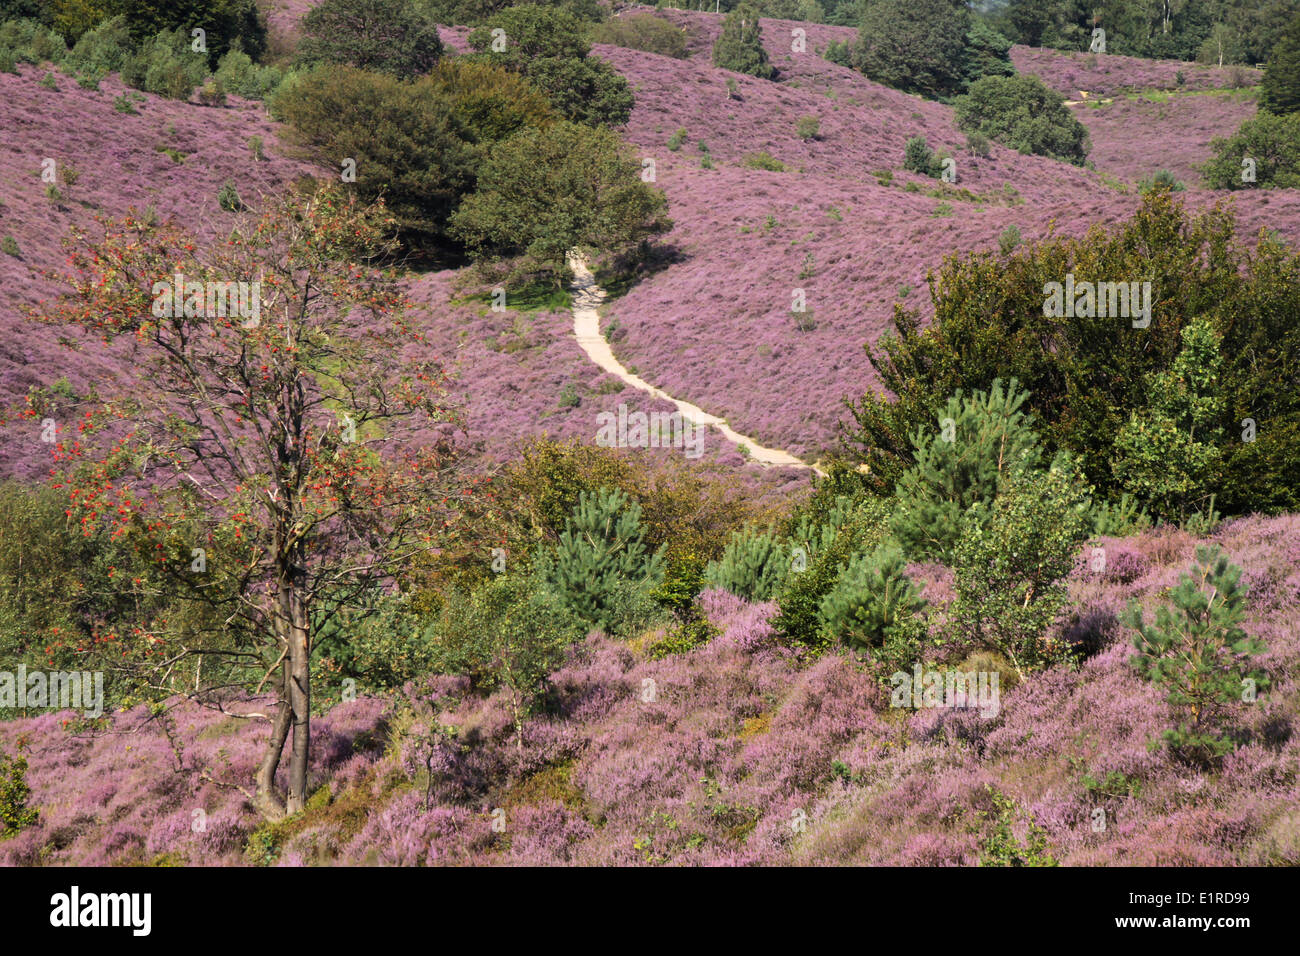 Hills with blooming Heather, an impression of National Park Veluwezoom. Stock Photo